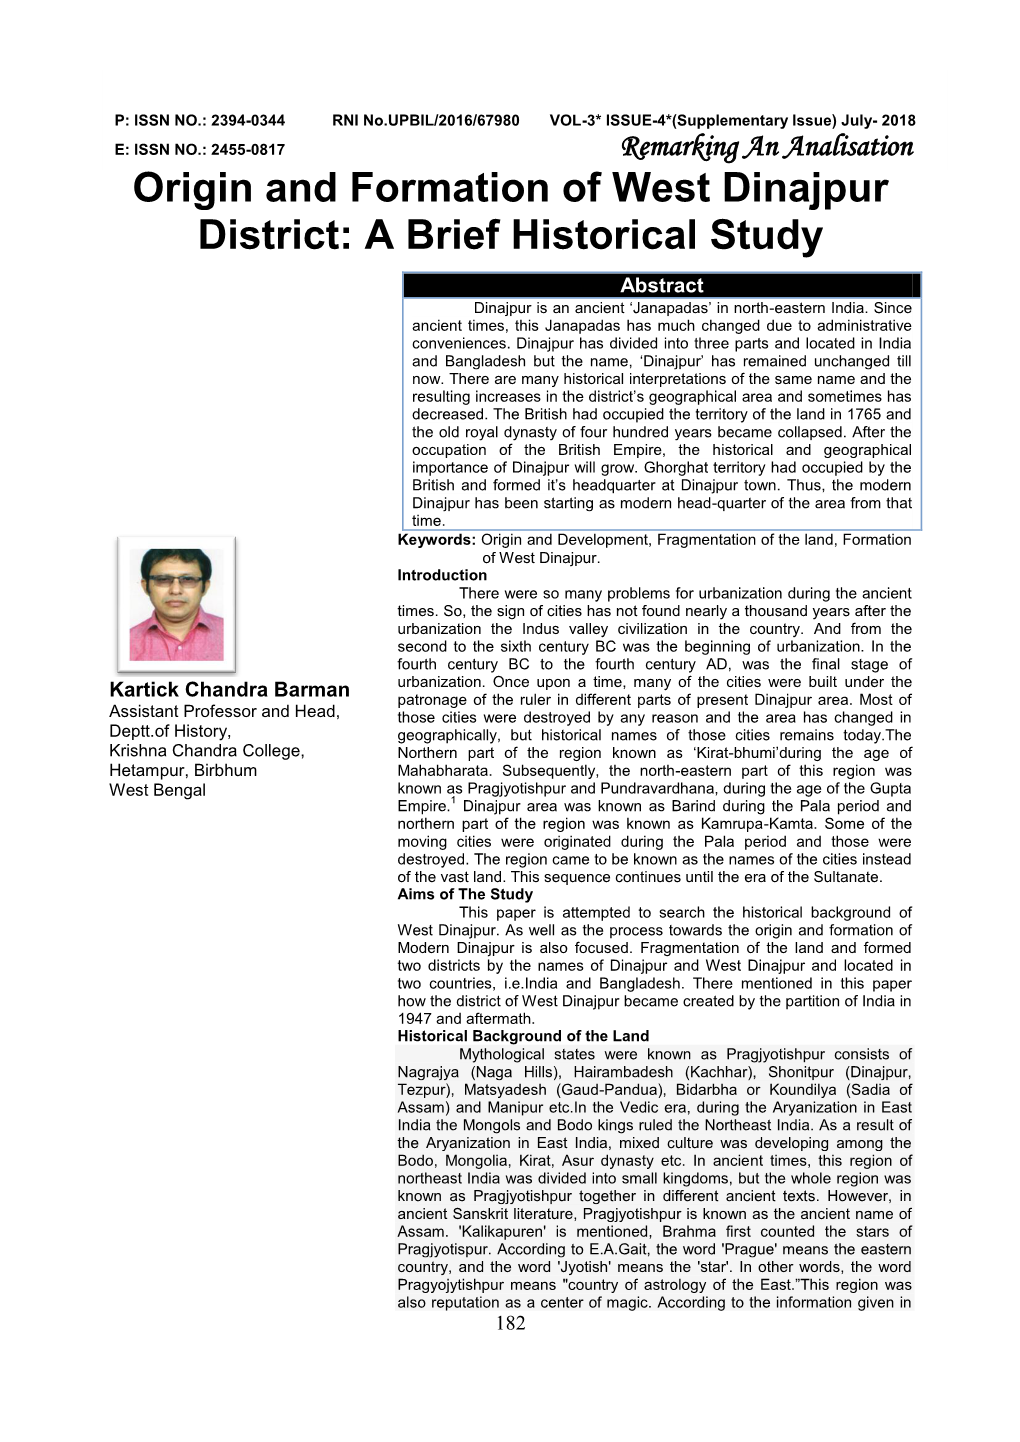 Origin and Formation of West Dinajpur District: a Brief Historical Study Abstract Dinajpur Is an Ancient ‘Janapadas’ in North-Eastern India